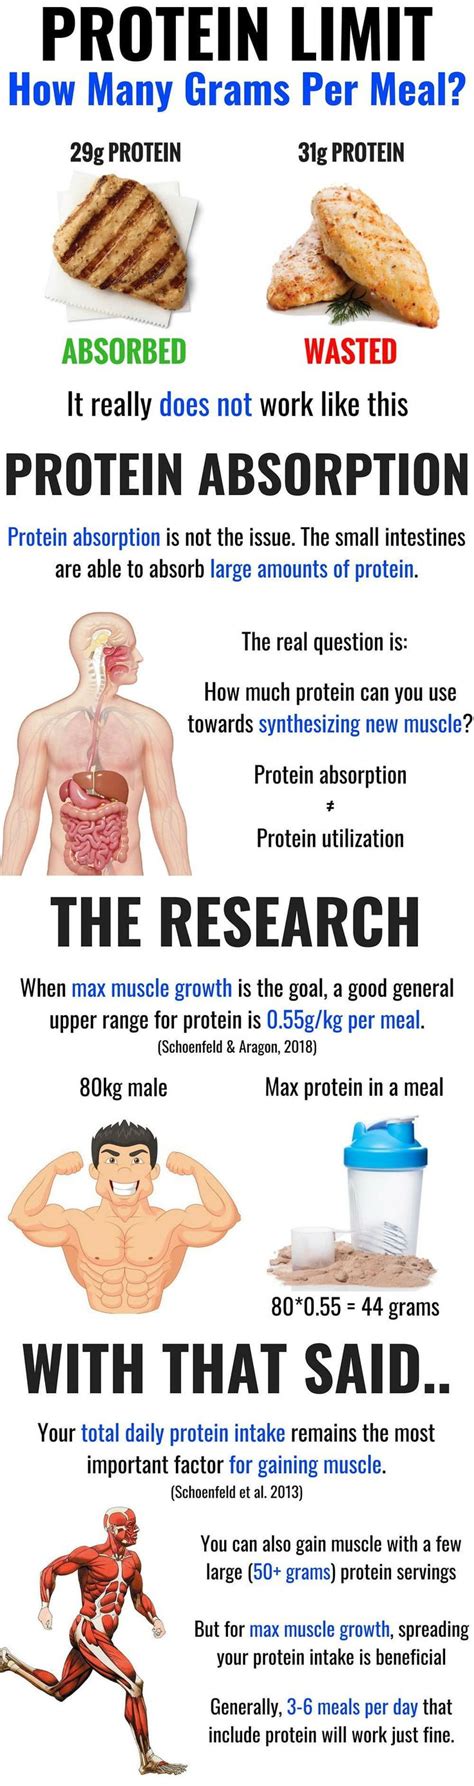 How long does it take to absorb 30g of protein?